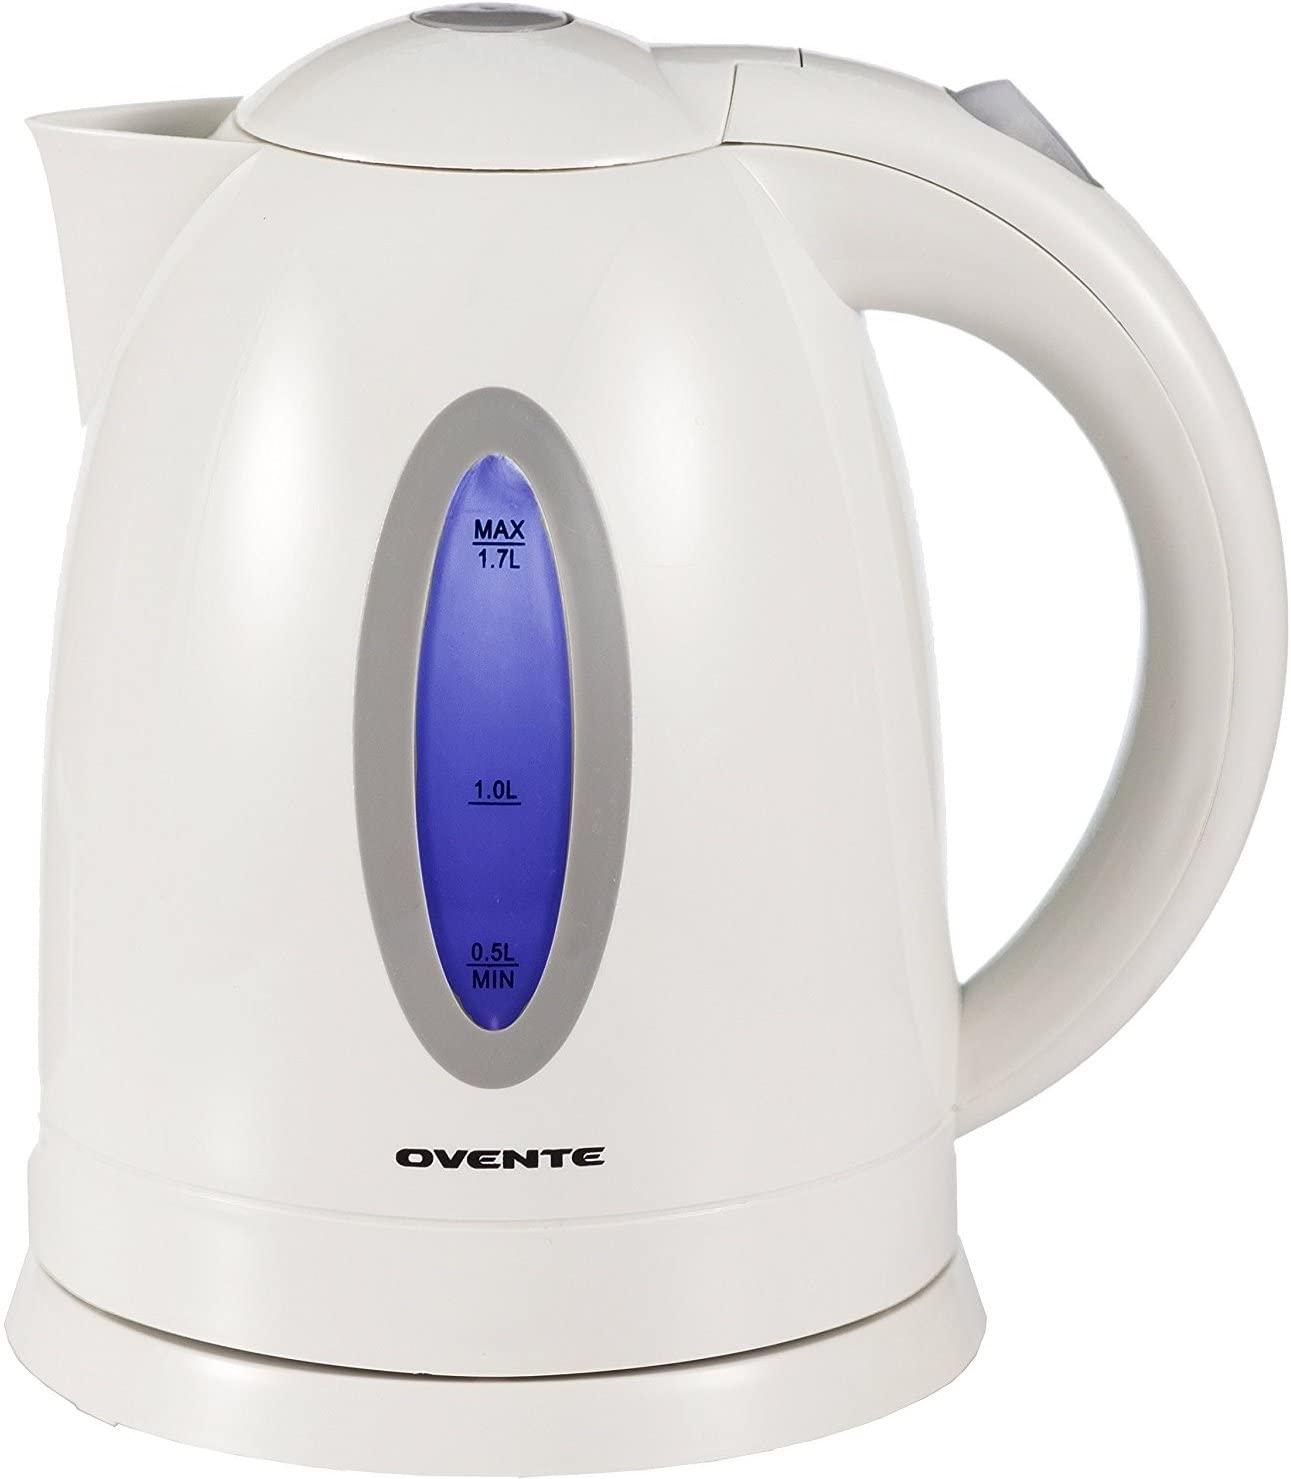 Ovente Electric Hot Water Kettle 1.7 Liter White Teapot